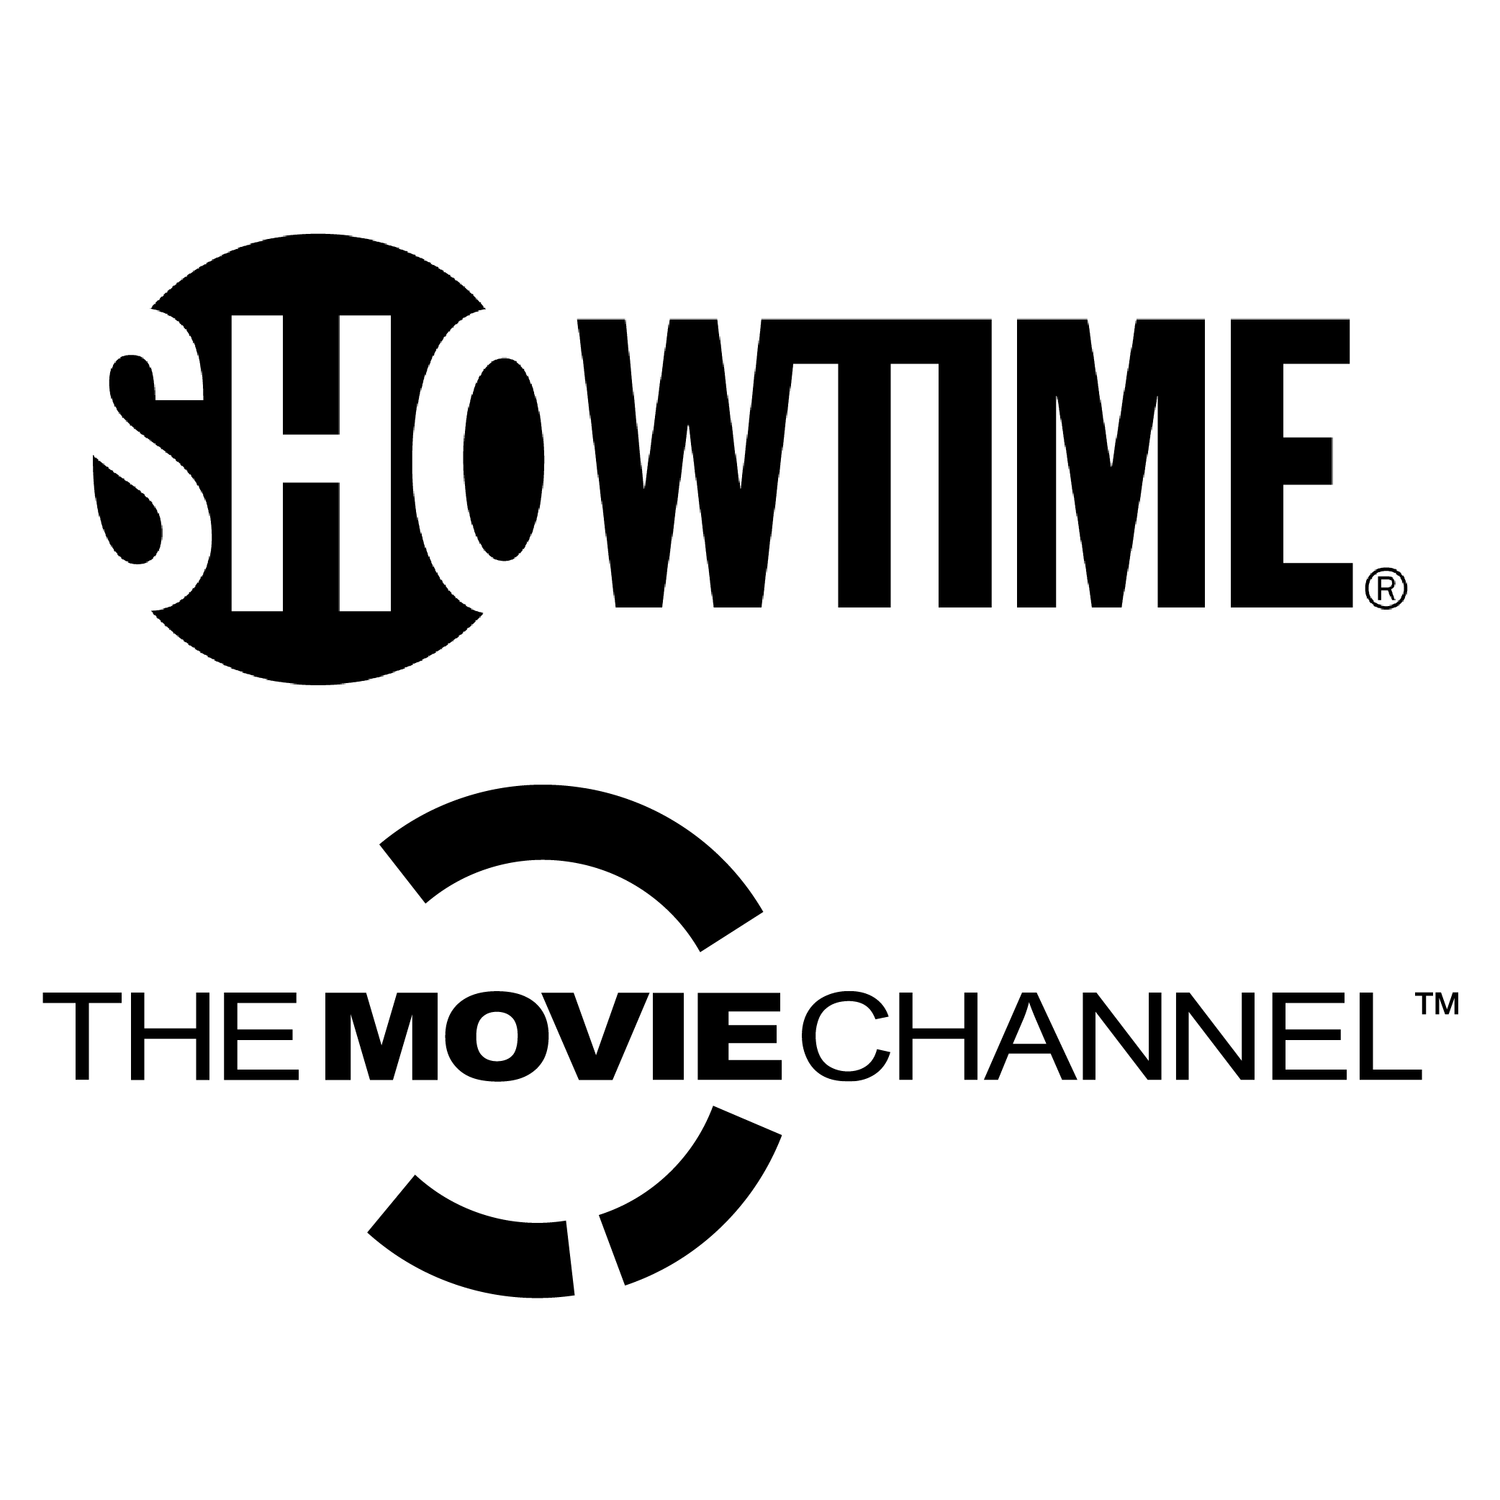 The Movie Channel Logo - Showtime